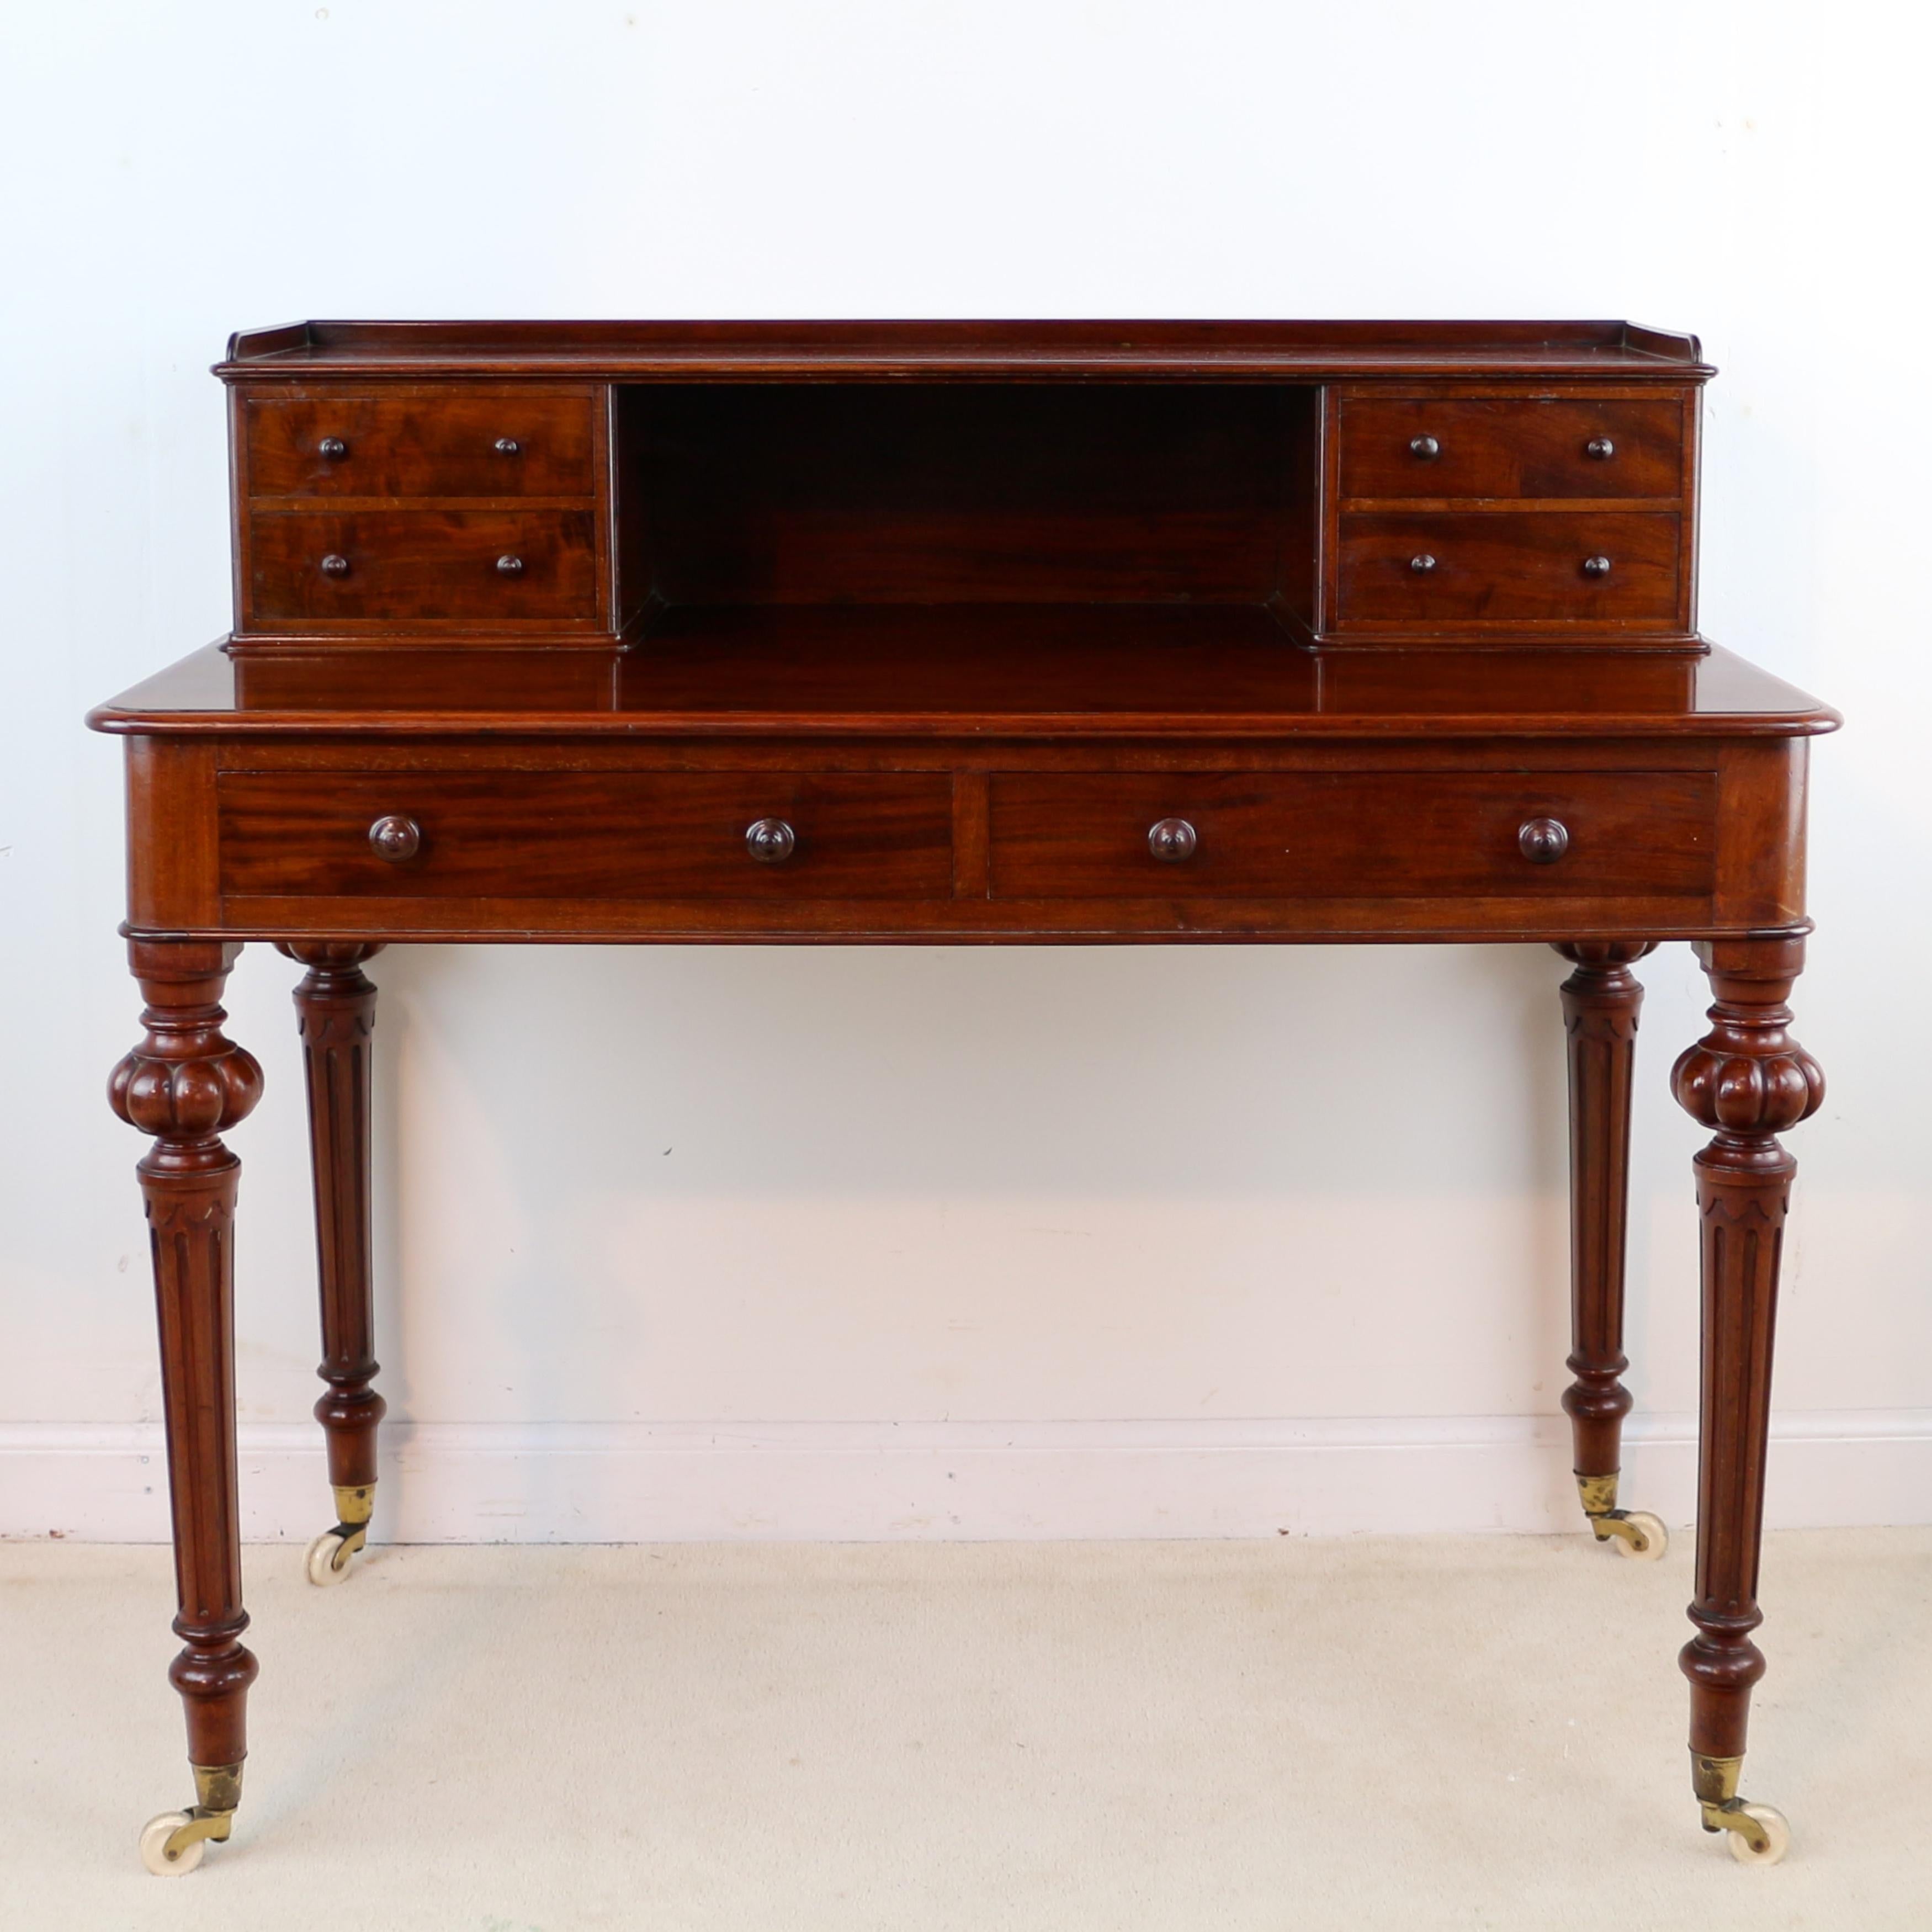 A handsome Victorian mahogany writing table or desk by Heal’s of London. This example features a raised back with galleried shelf and four small drawers and two further deep drawers to the table, standing on attractive turned legs with bold reeding